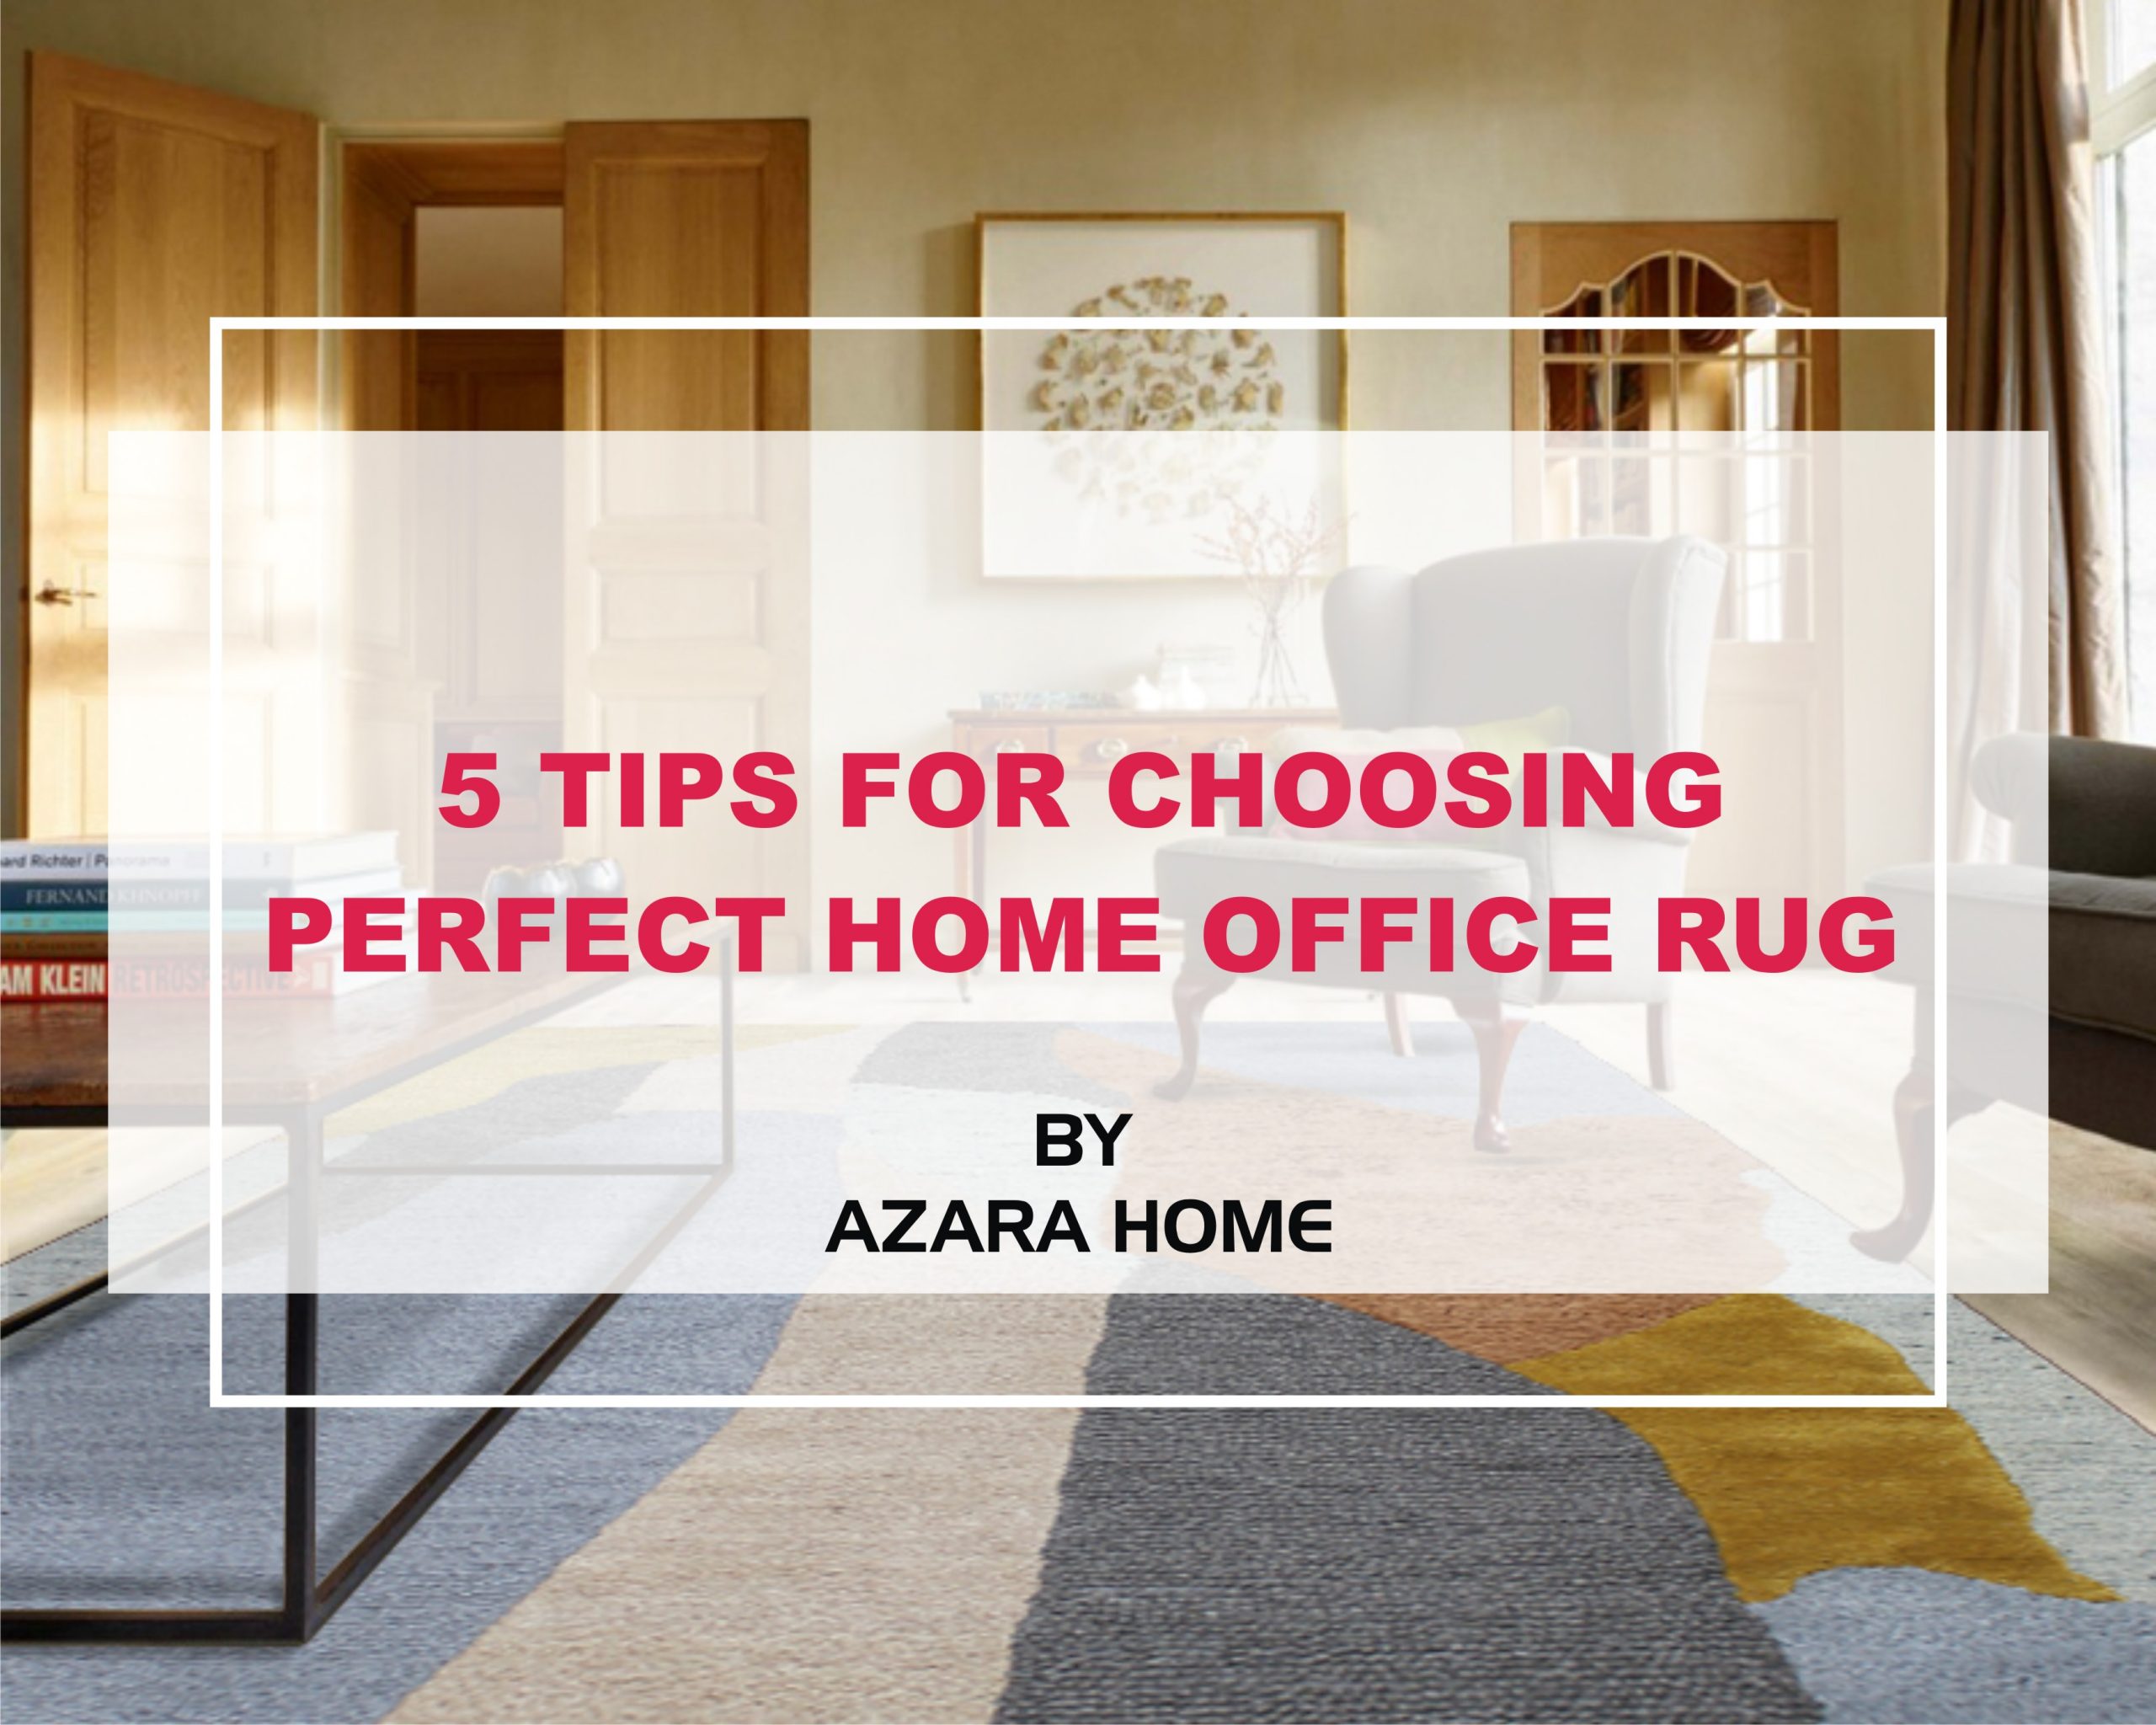 5 Tips For Choosing Perfect Home Office Rug - Azara Home